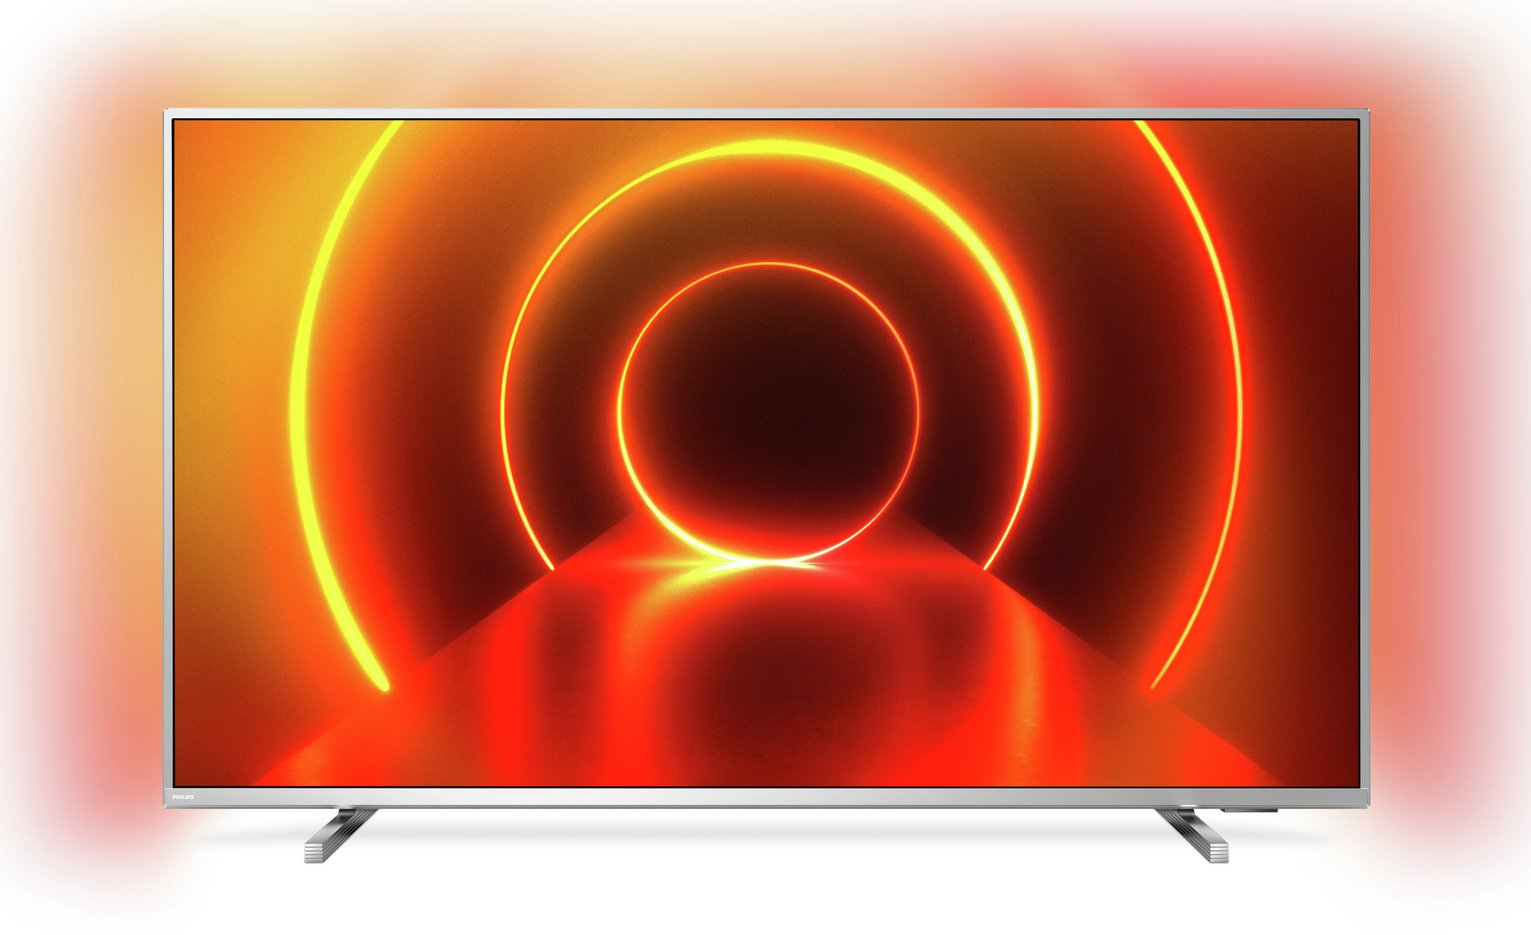 Philips 70 Inch 70PUS8105 Smart 4K Ultra HD LED TV Review